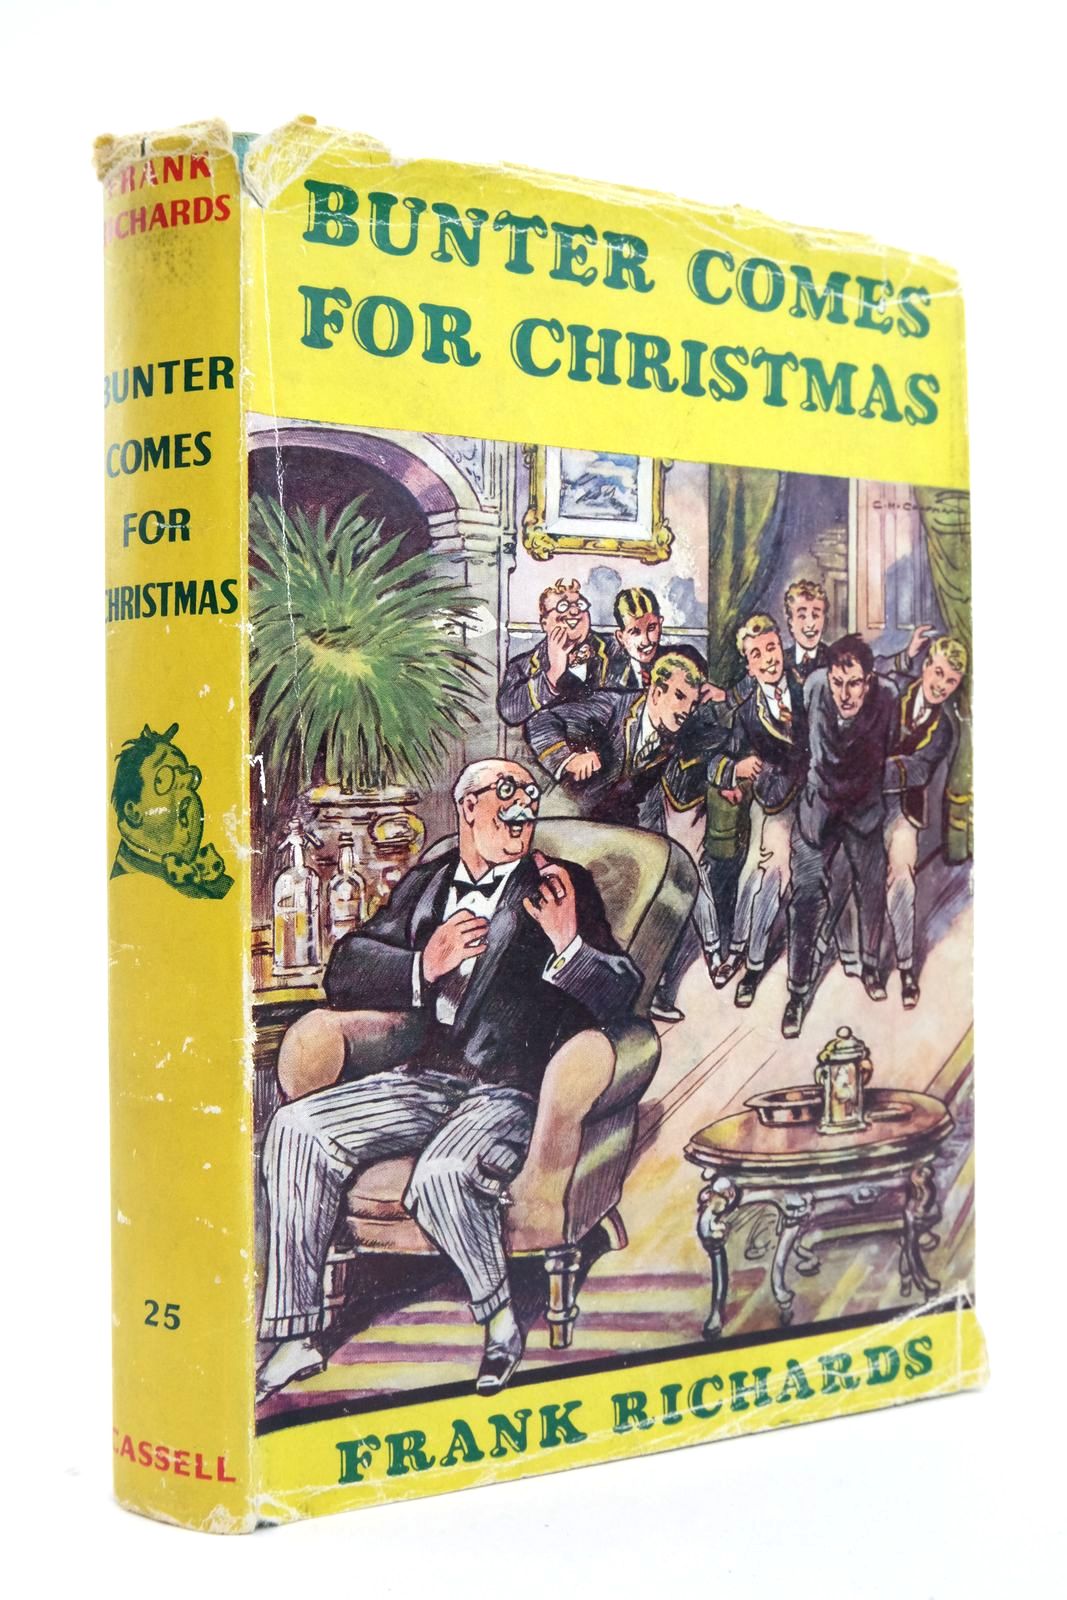 Photo of BUNTER COMES FOR CHRISTMAS written by Richards, Frank illustrated by Chapman, C.H. published by Cassell (STOCK CODE: 2136848)  for sale by Stella & Rose's Books